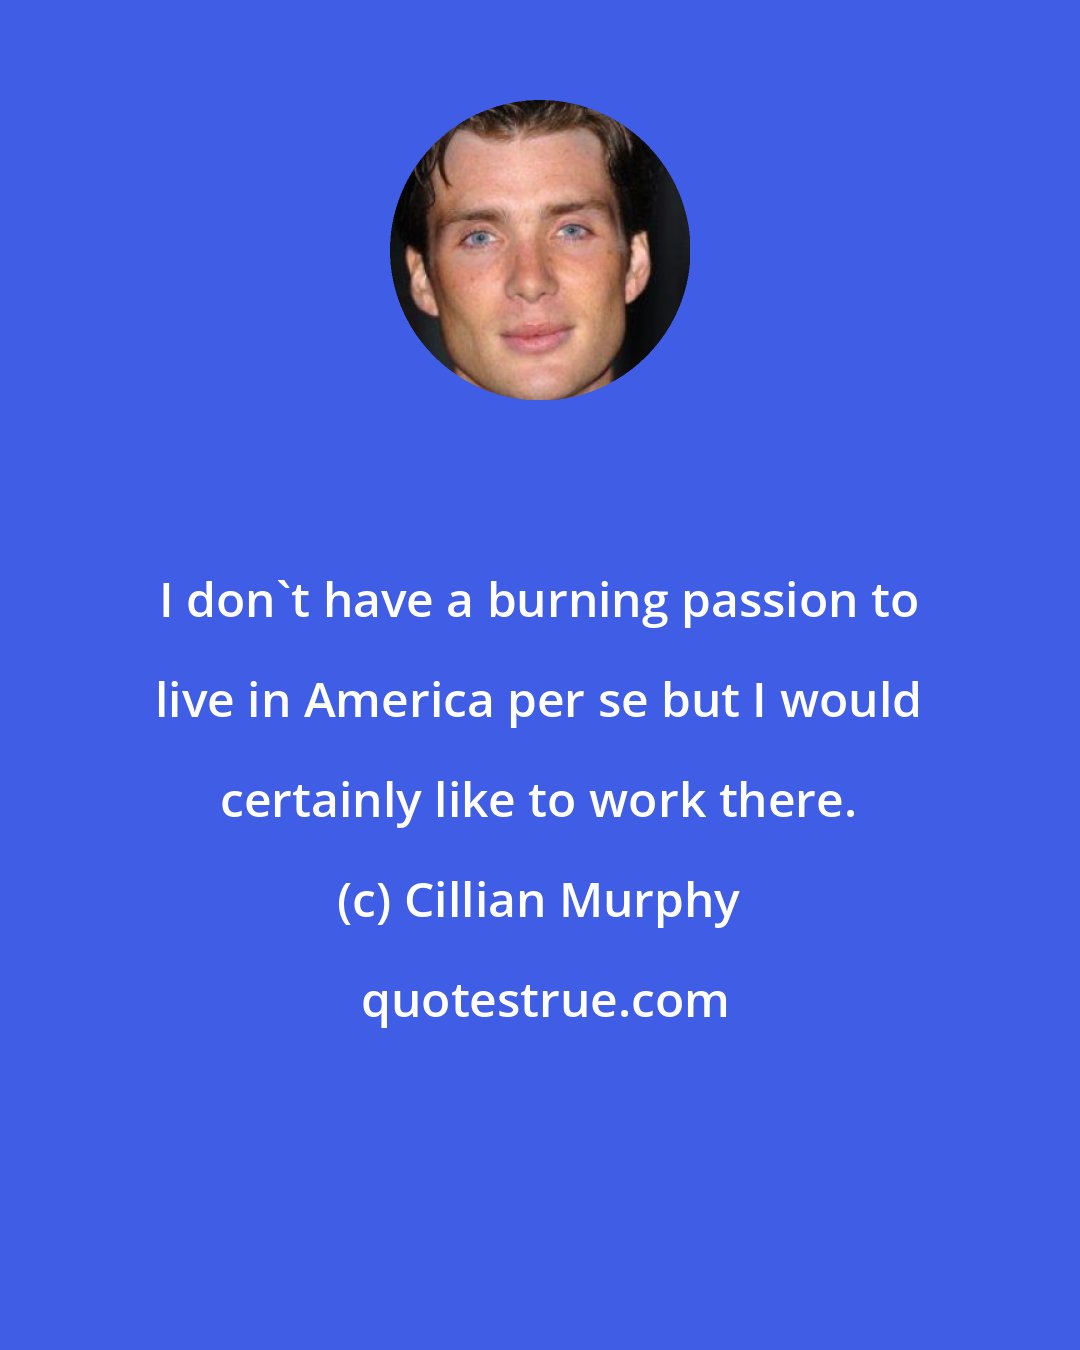 Cillian Murphy: I don't have a burning passion to live in America per se but I would certainly like to work there.